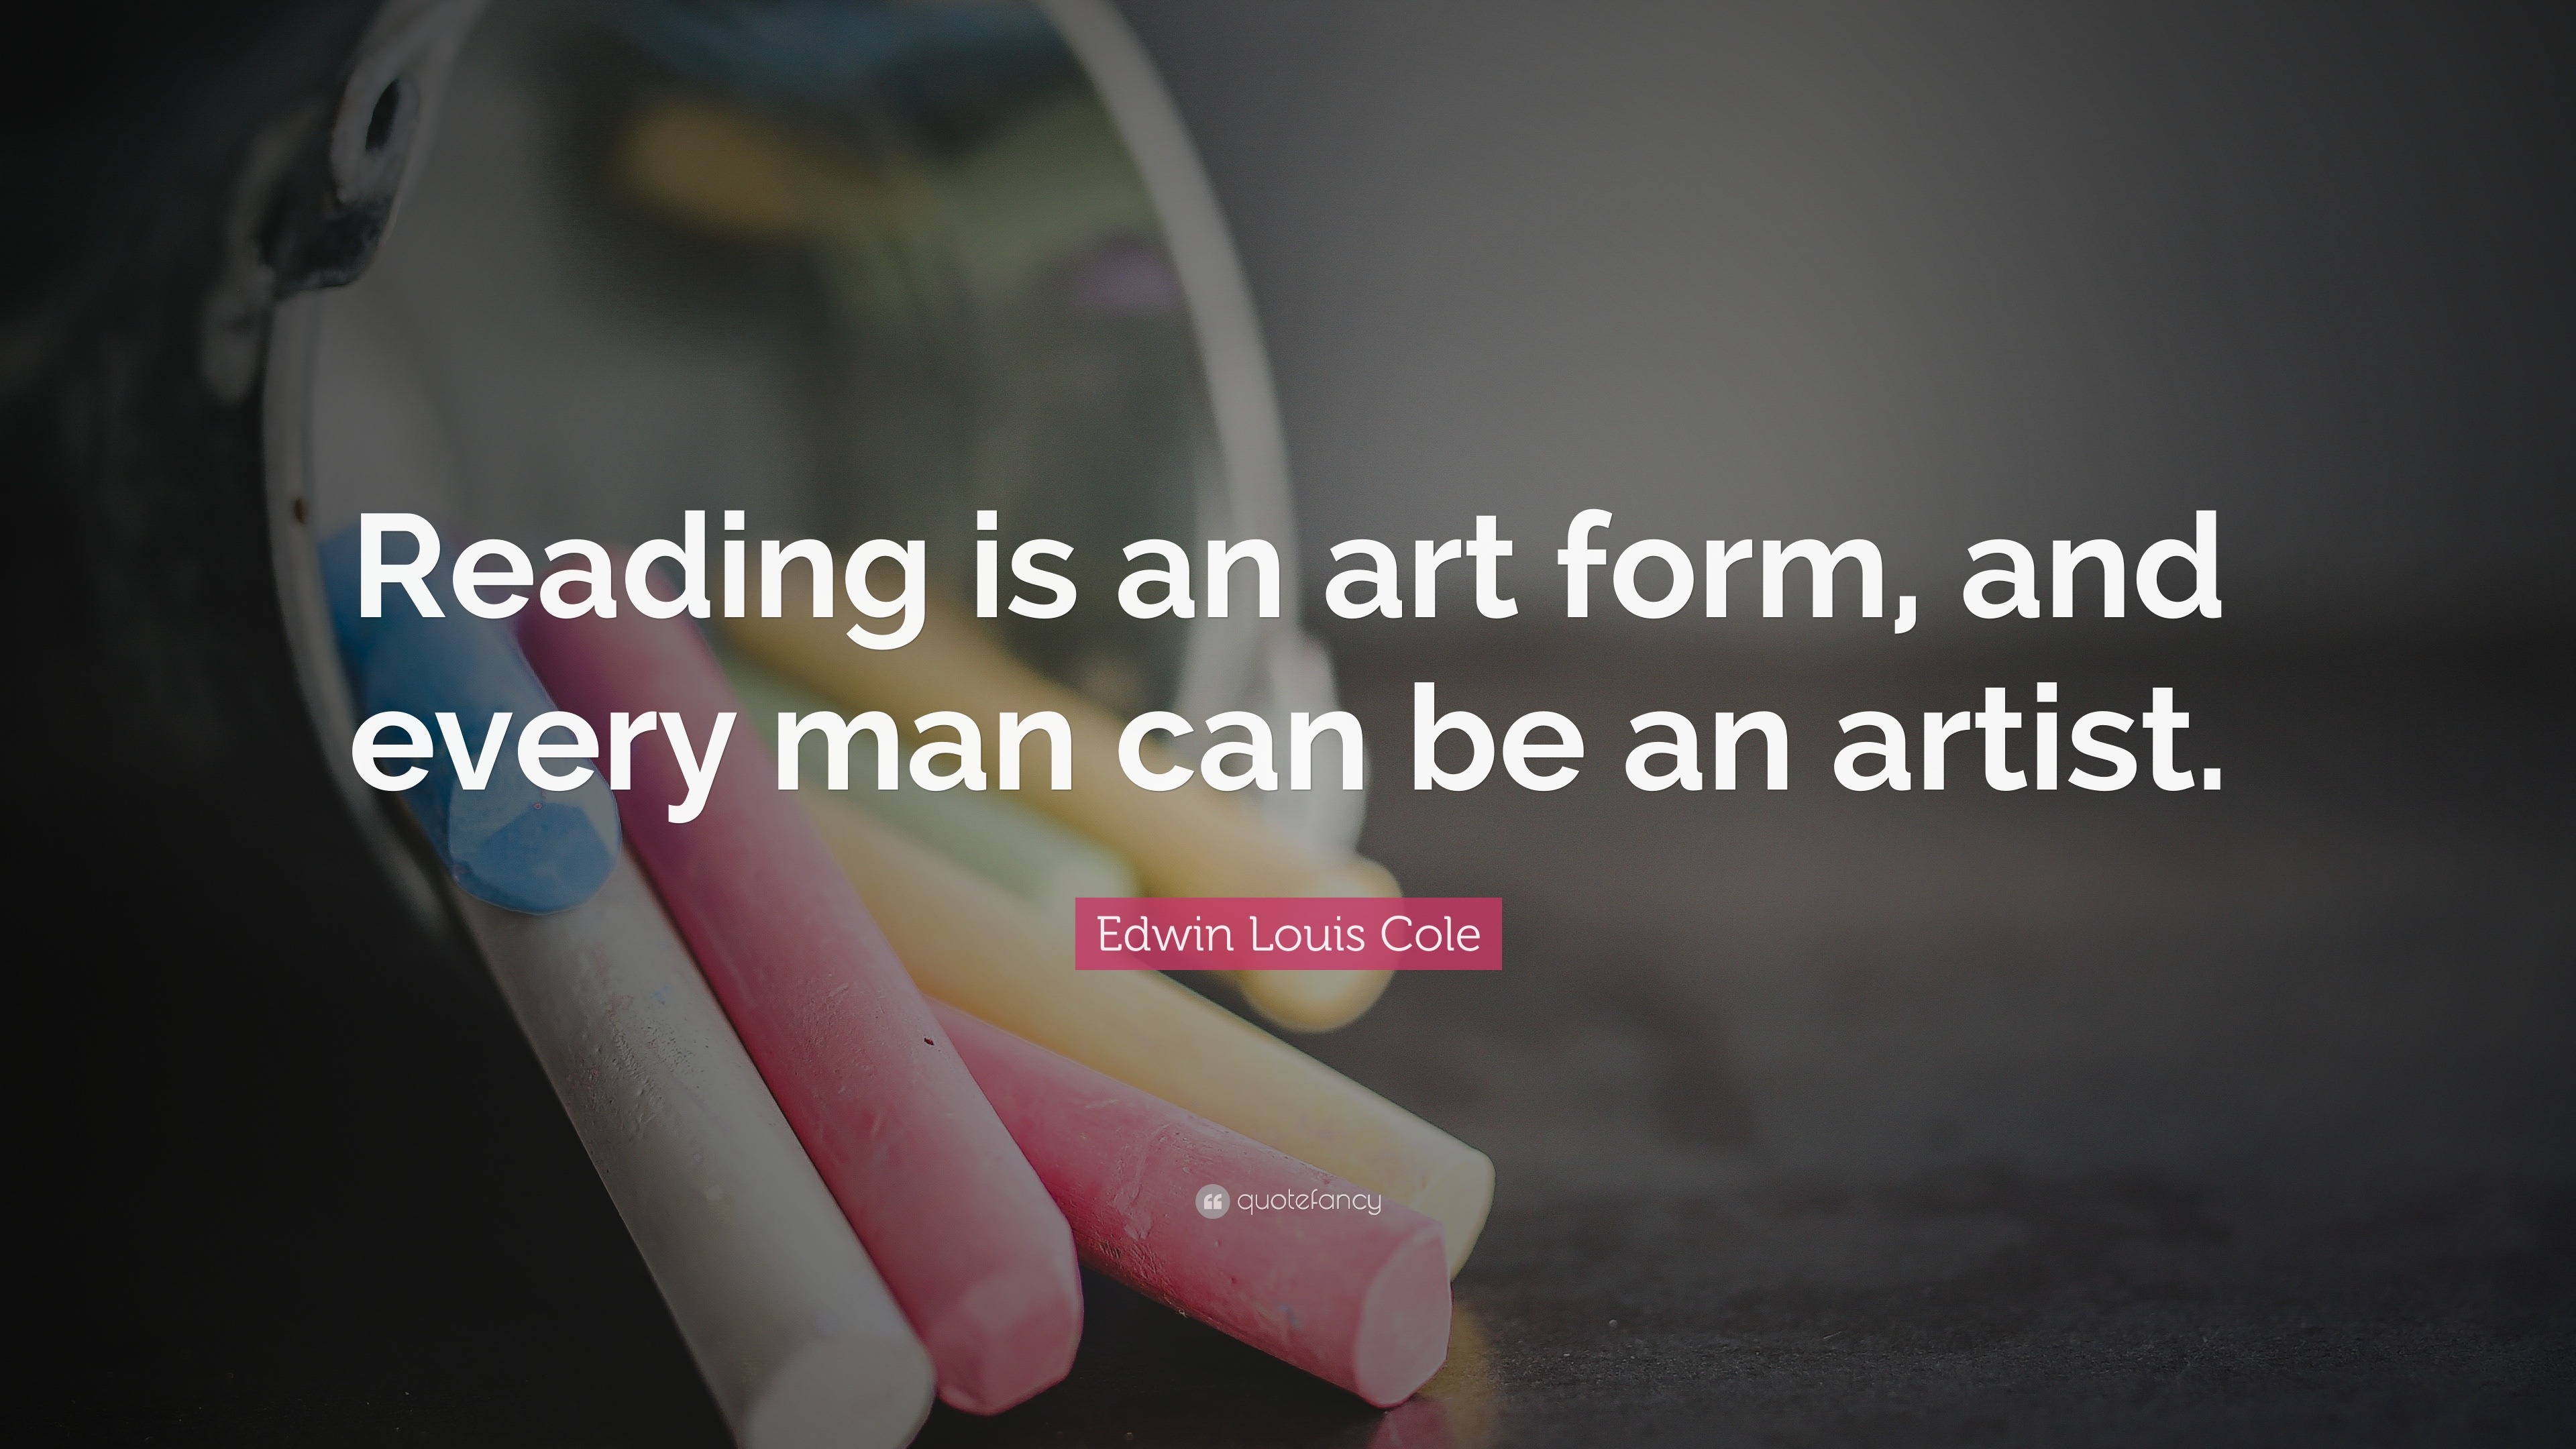 Edwin Louis Cole. #inspirational #quotes #inspiration #quote #inspire  #KOR#quote